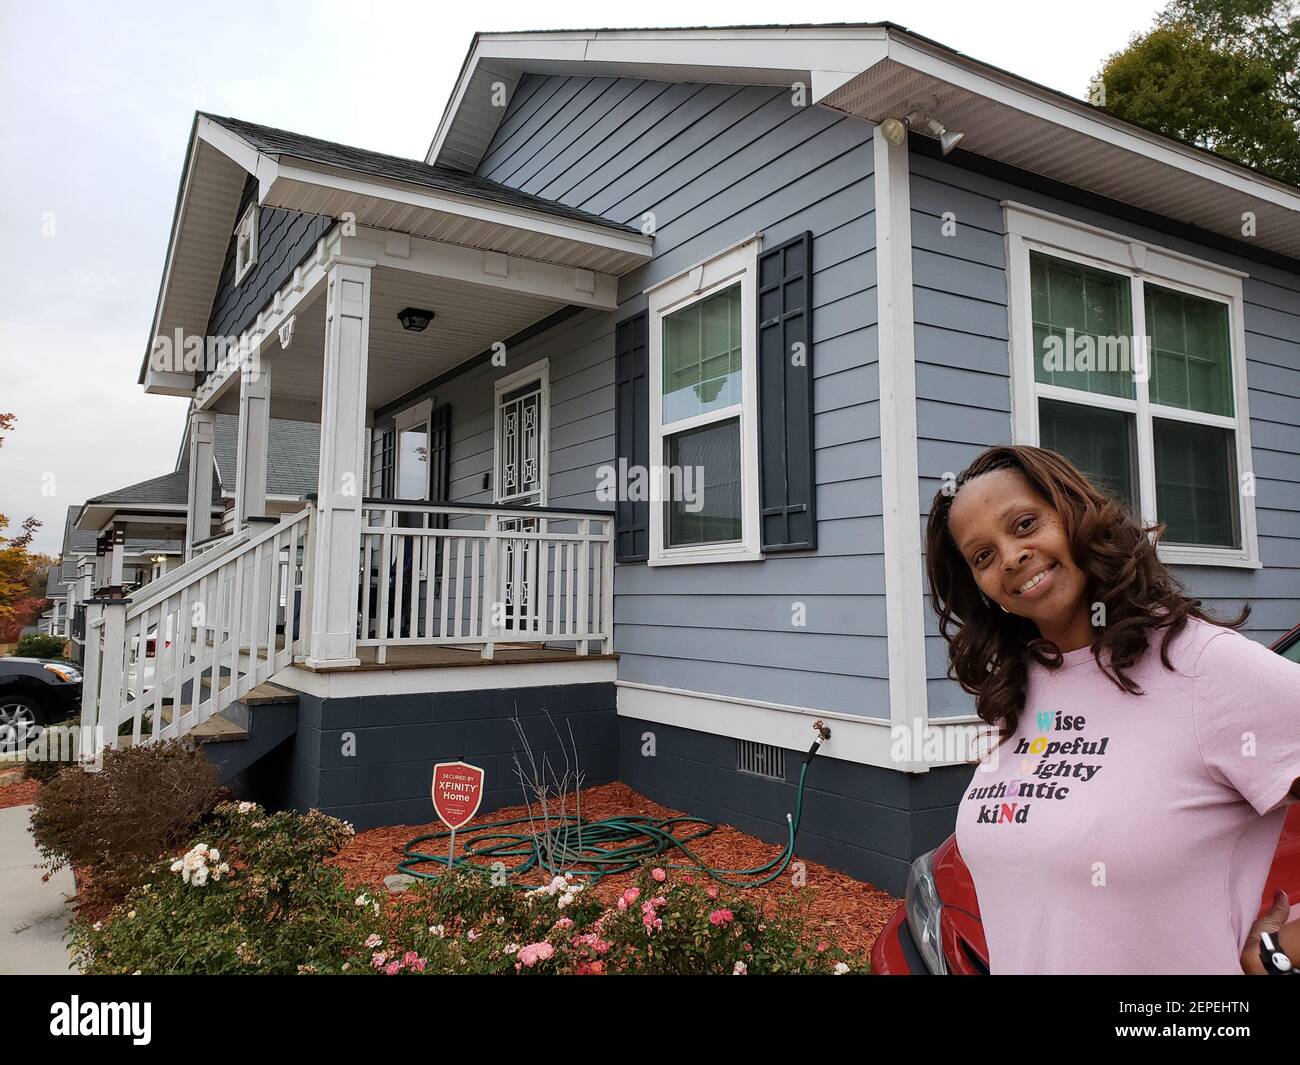 Lawanda Gibson, a childcare curriculum coordinator, became a first-time homebuyer when she moved into an Atlanta Habitat for Humanity subdivision in the city's northwest. Since then, she said, she's finished a bachelor's degree and earned a master's degree. She and neighbors look out for one another, she said. 'We all came from the same struggle.' (Matt Kempner/Atlanta Journal-Constitution/TNS/Sipa USA) Stock Photo